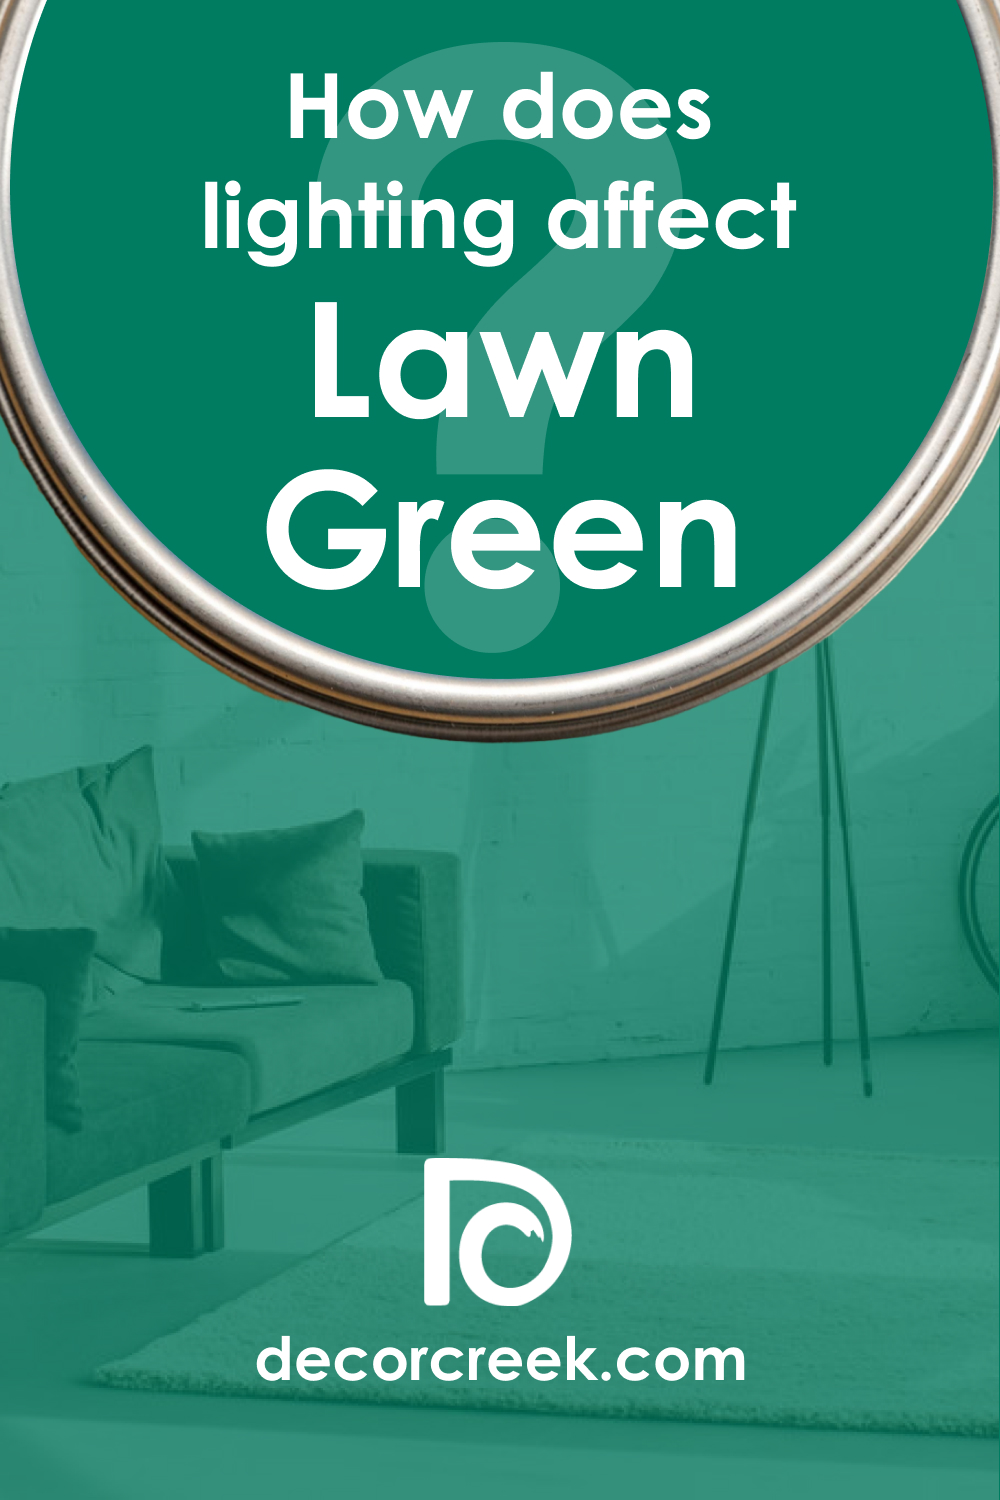 How Does Lighting Affect Lawn Green 2045-20?